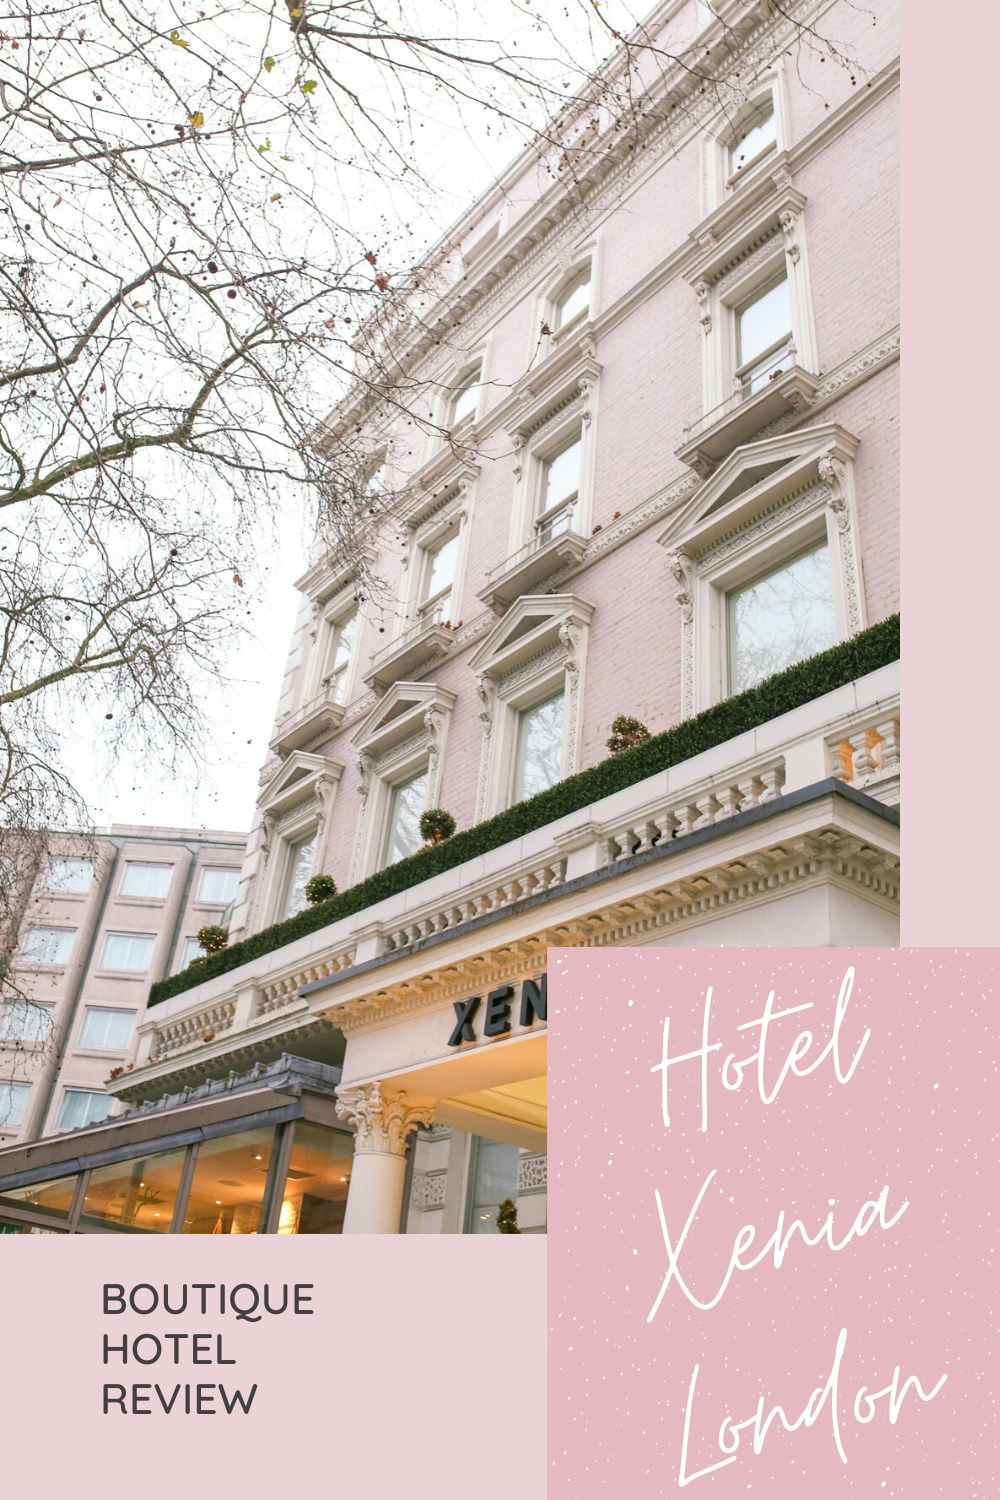 Hotel Xenia London Review: sharing a review of this 4-star boutique hotel in Kensington from the Marriott brand.